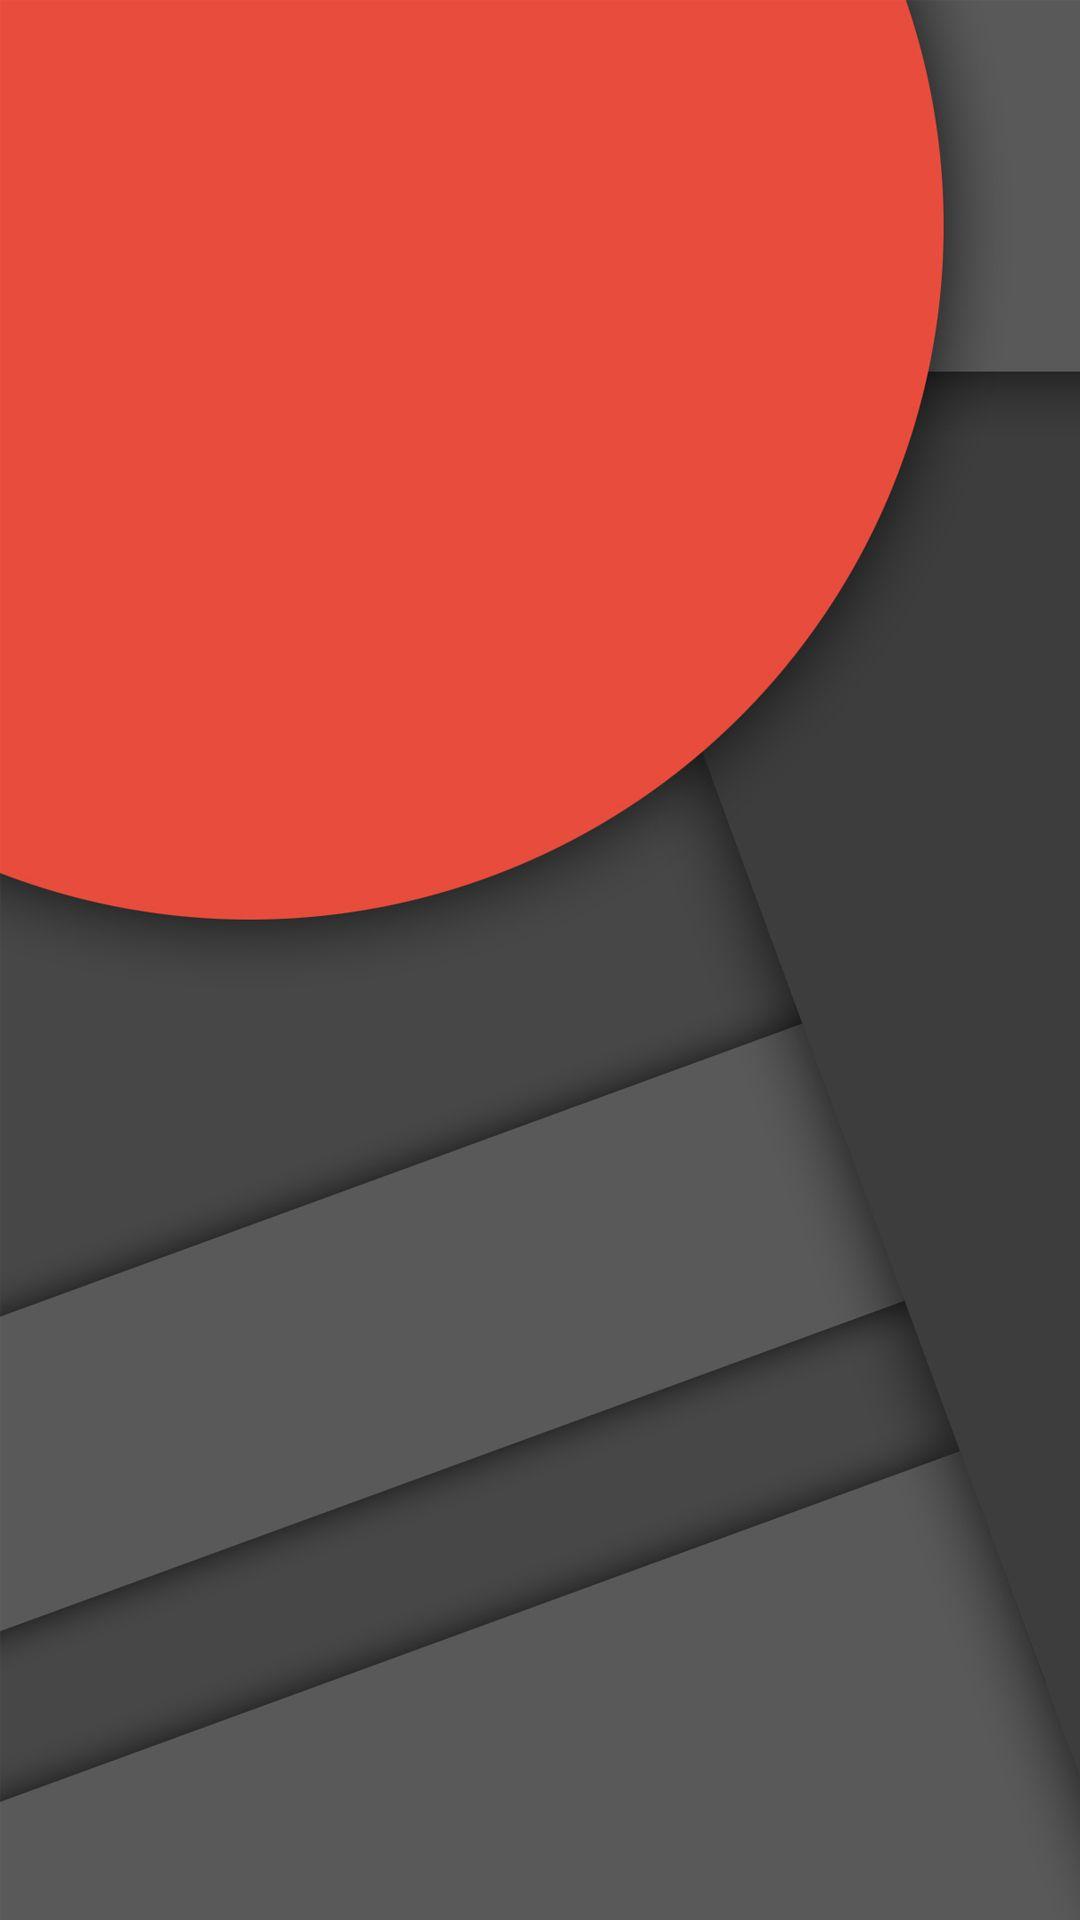 Red Black Google material design HD Wallpaper Android Phone